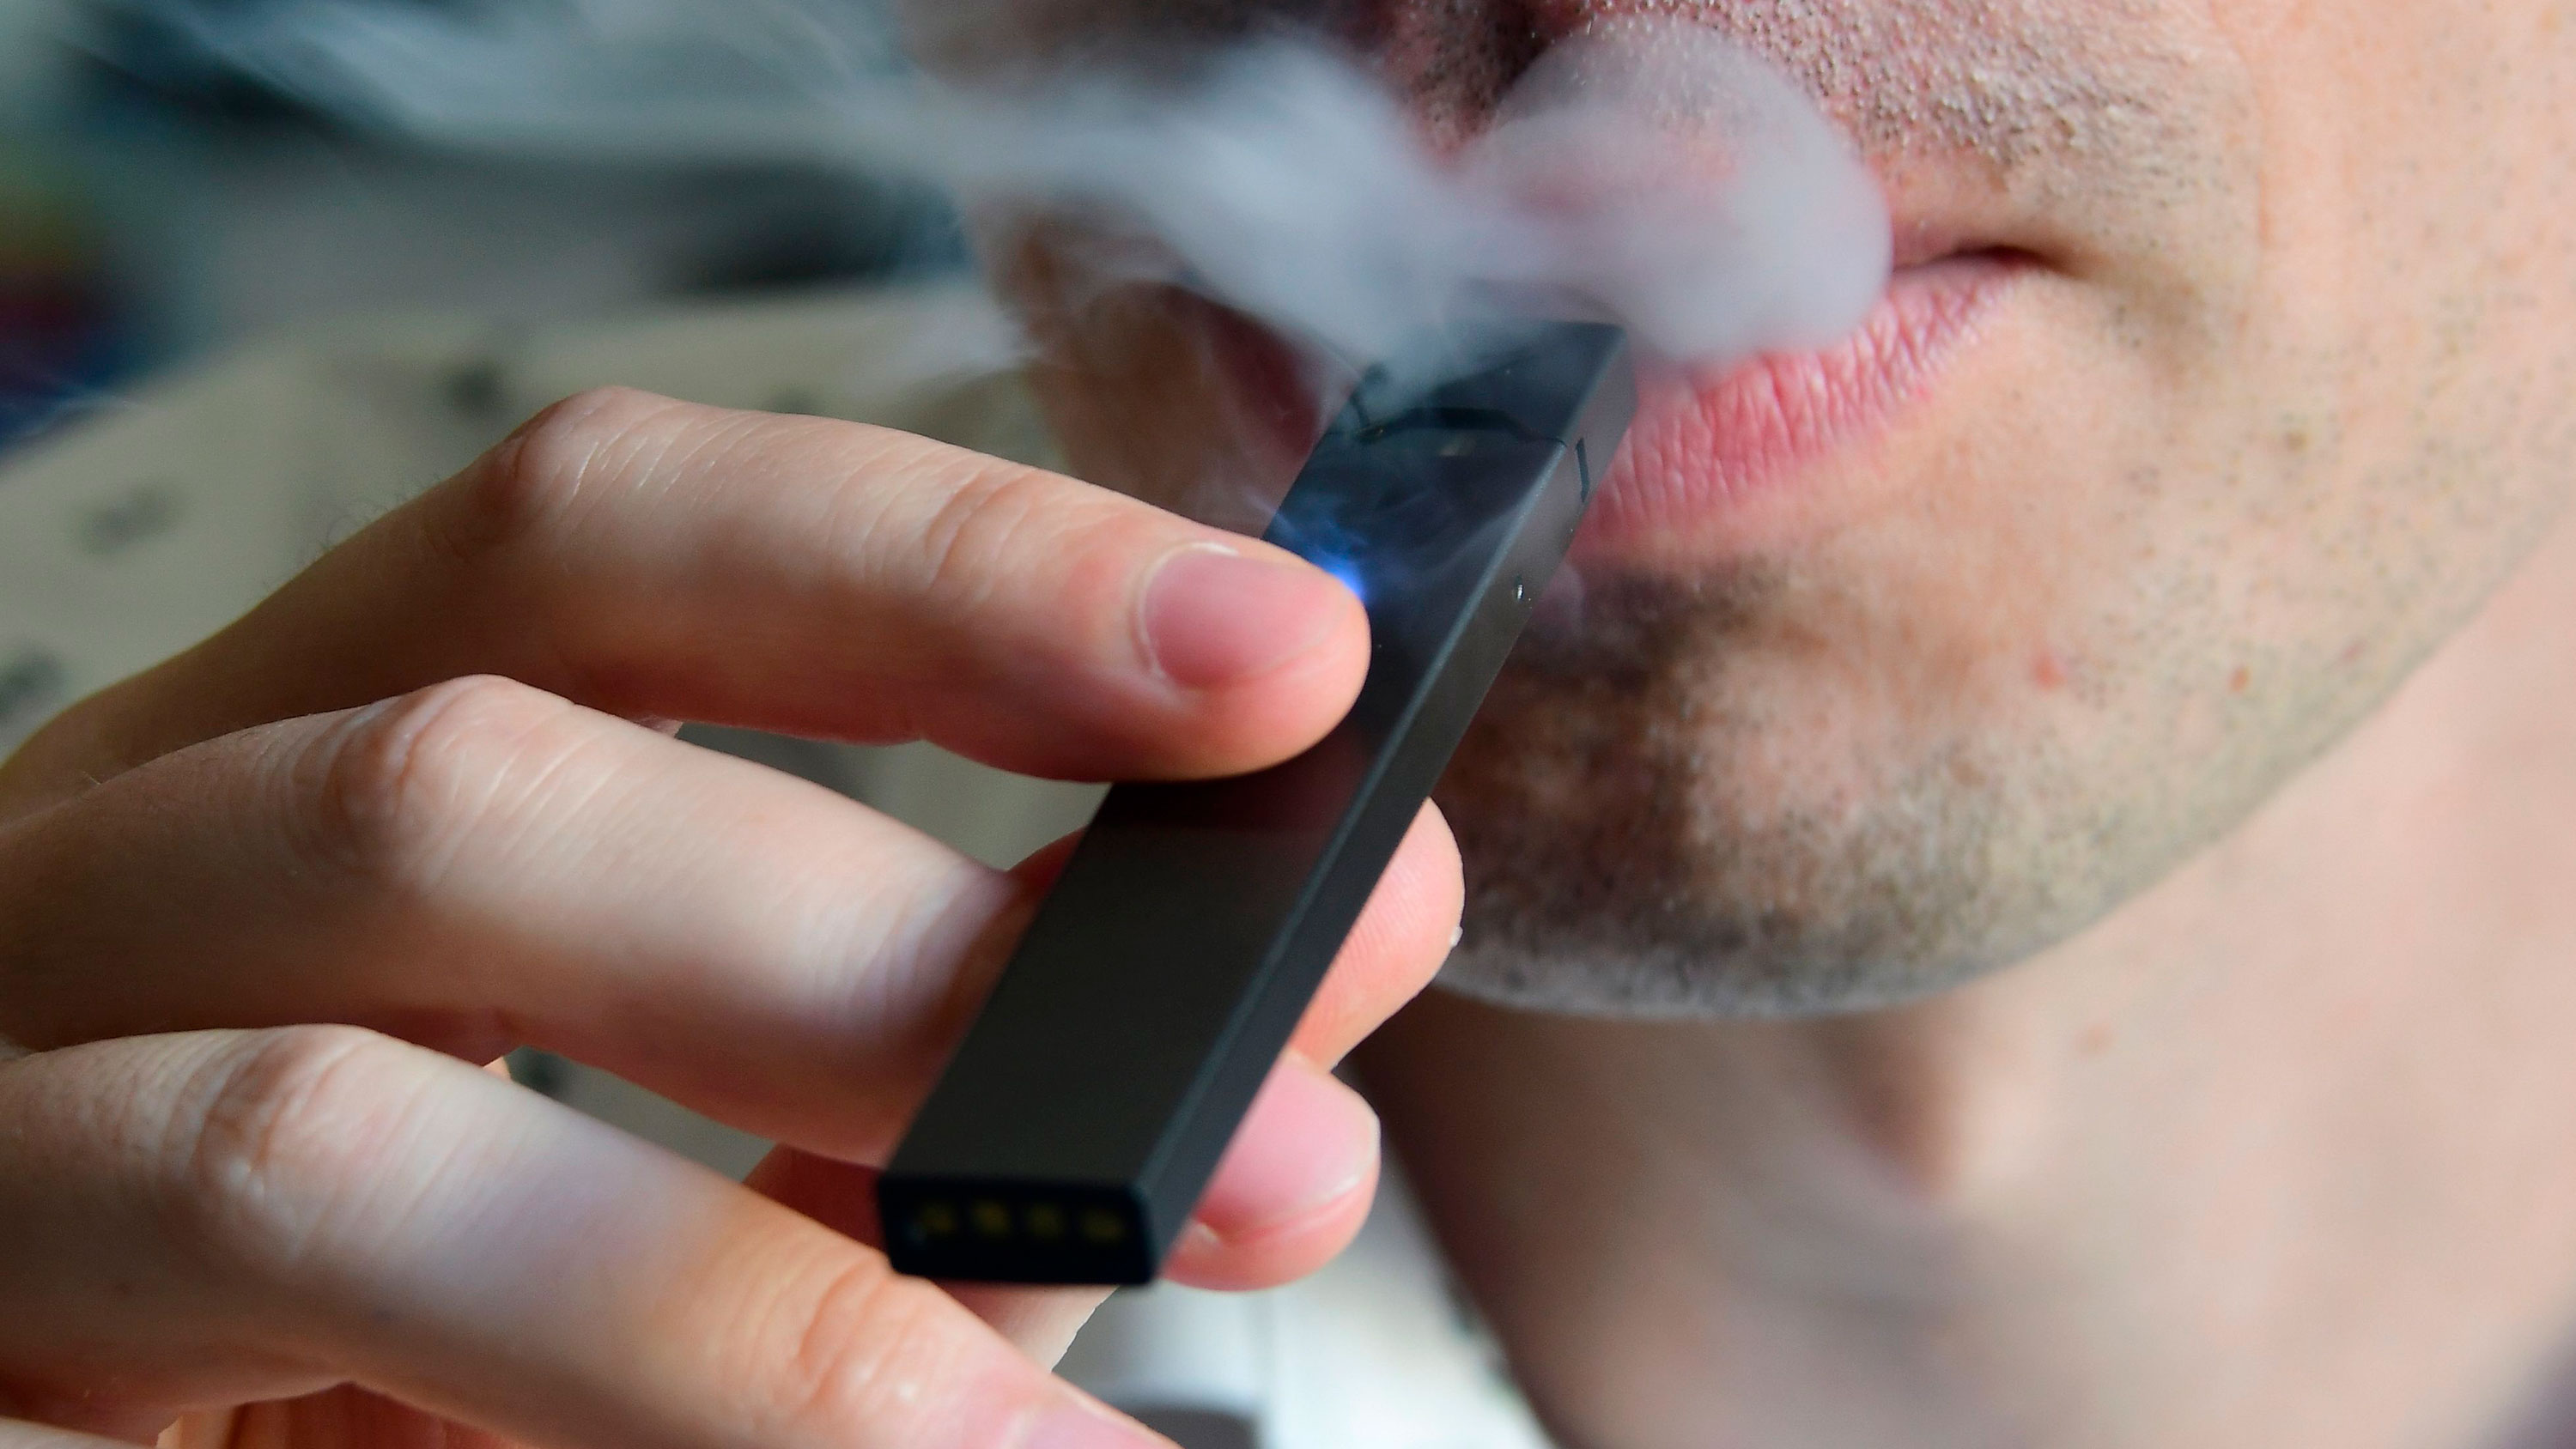 The FDA Orders Juul Labs To Remove Its Products From US Market